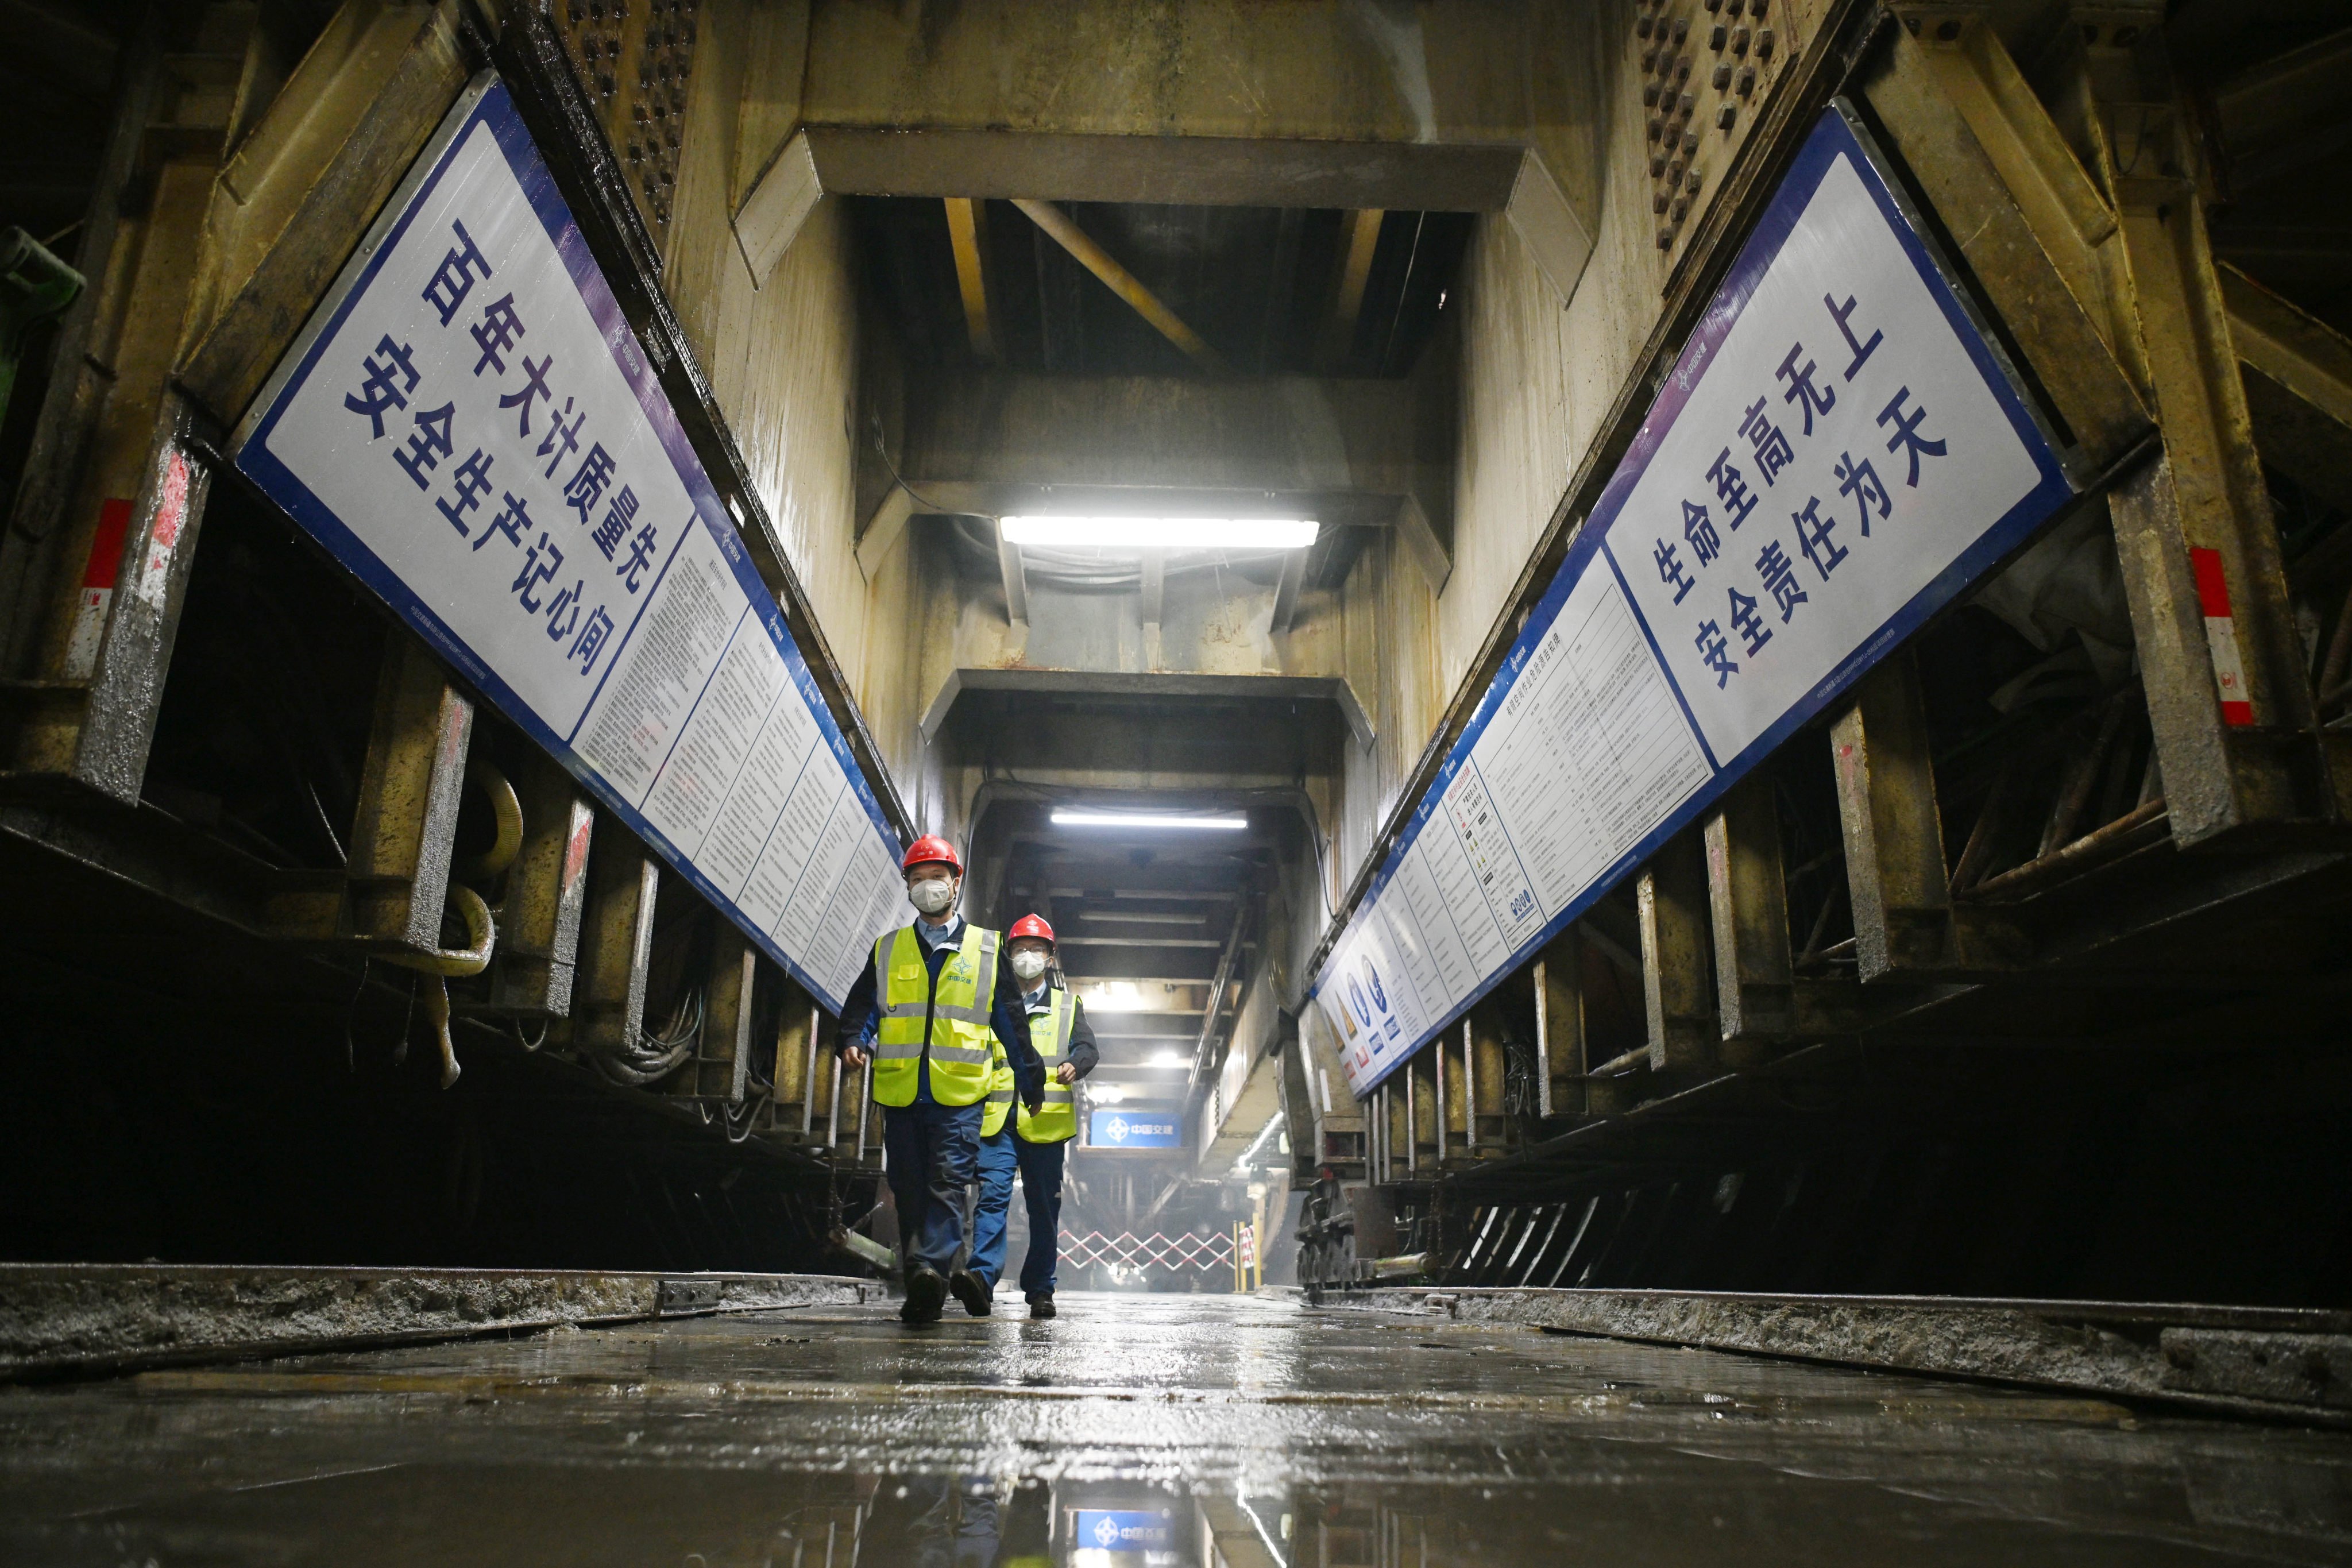 The Tianshan Shengli highway tunnel, now under construction, will be the world’s longest and enhance connectivity between China and Central Asia. Photo: Xinhua